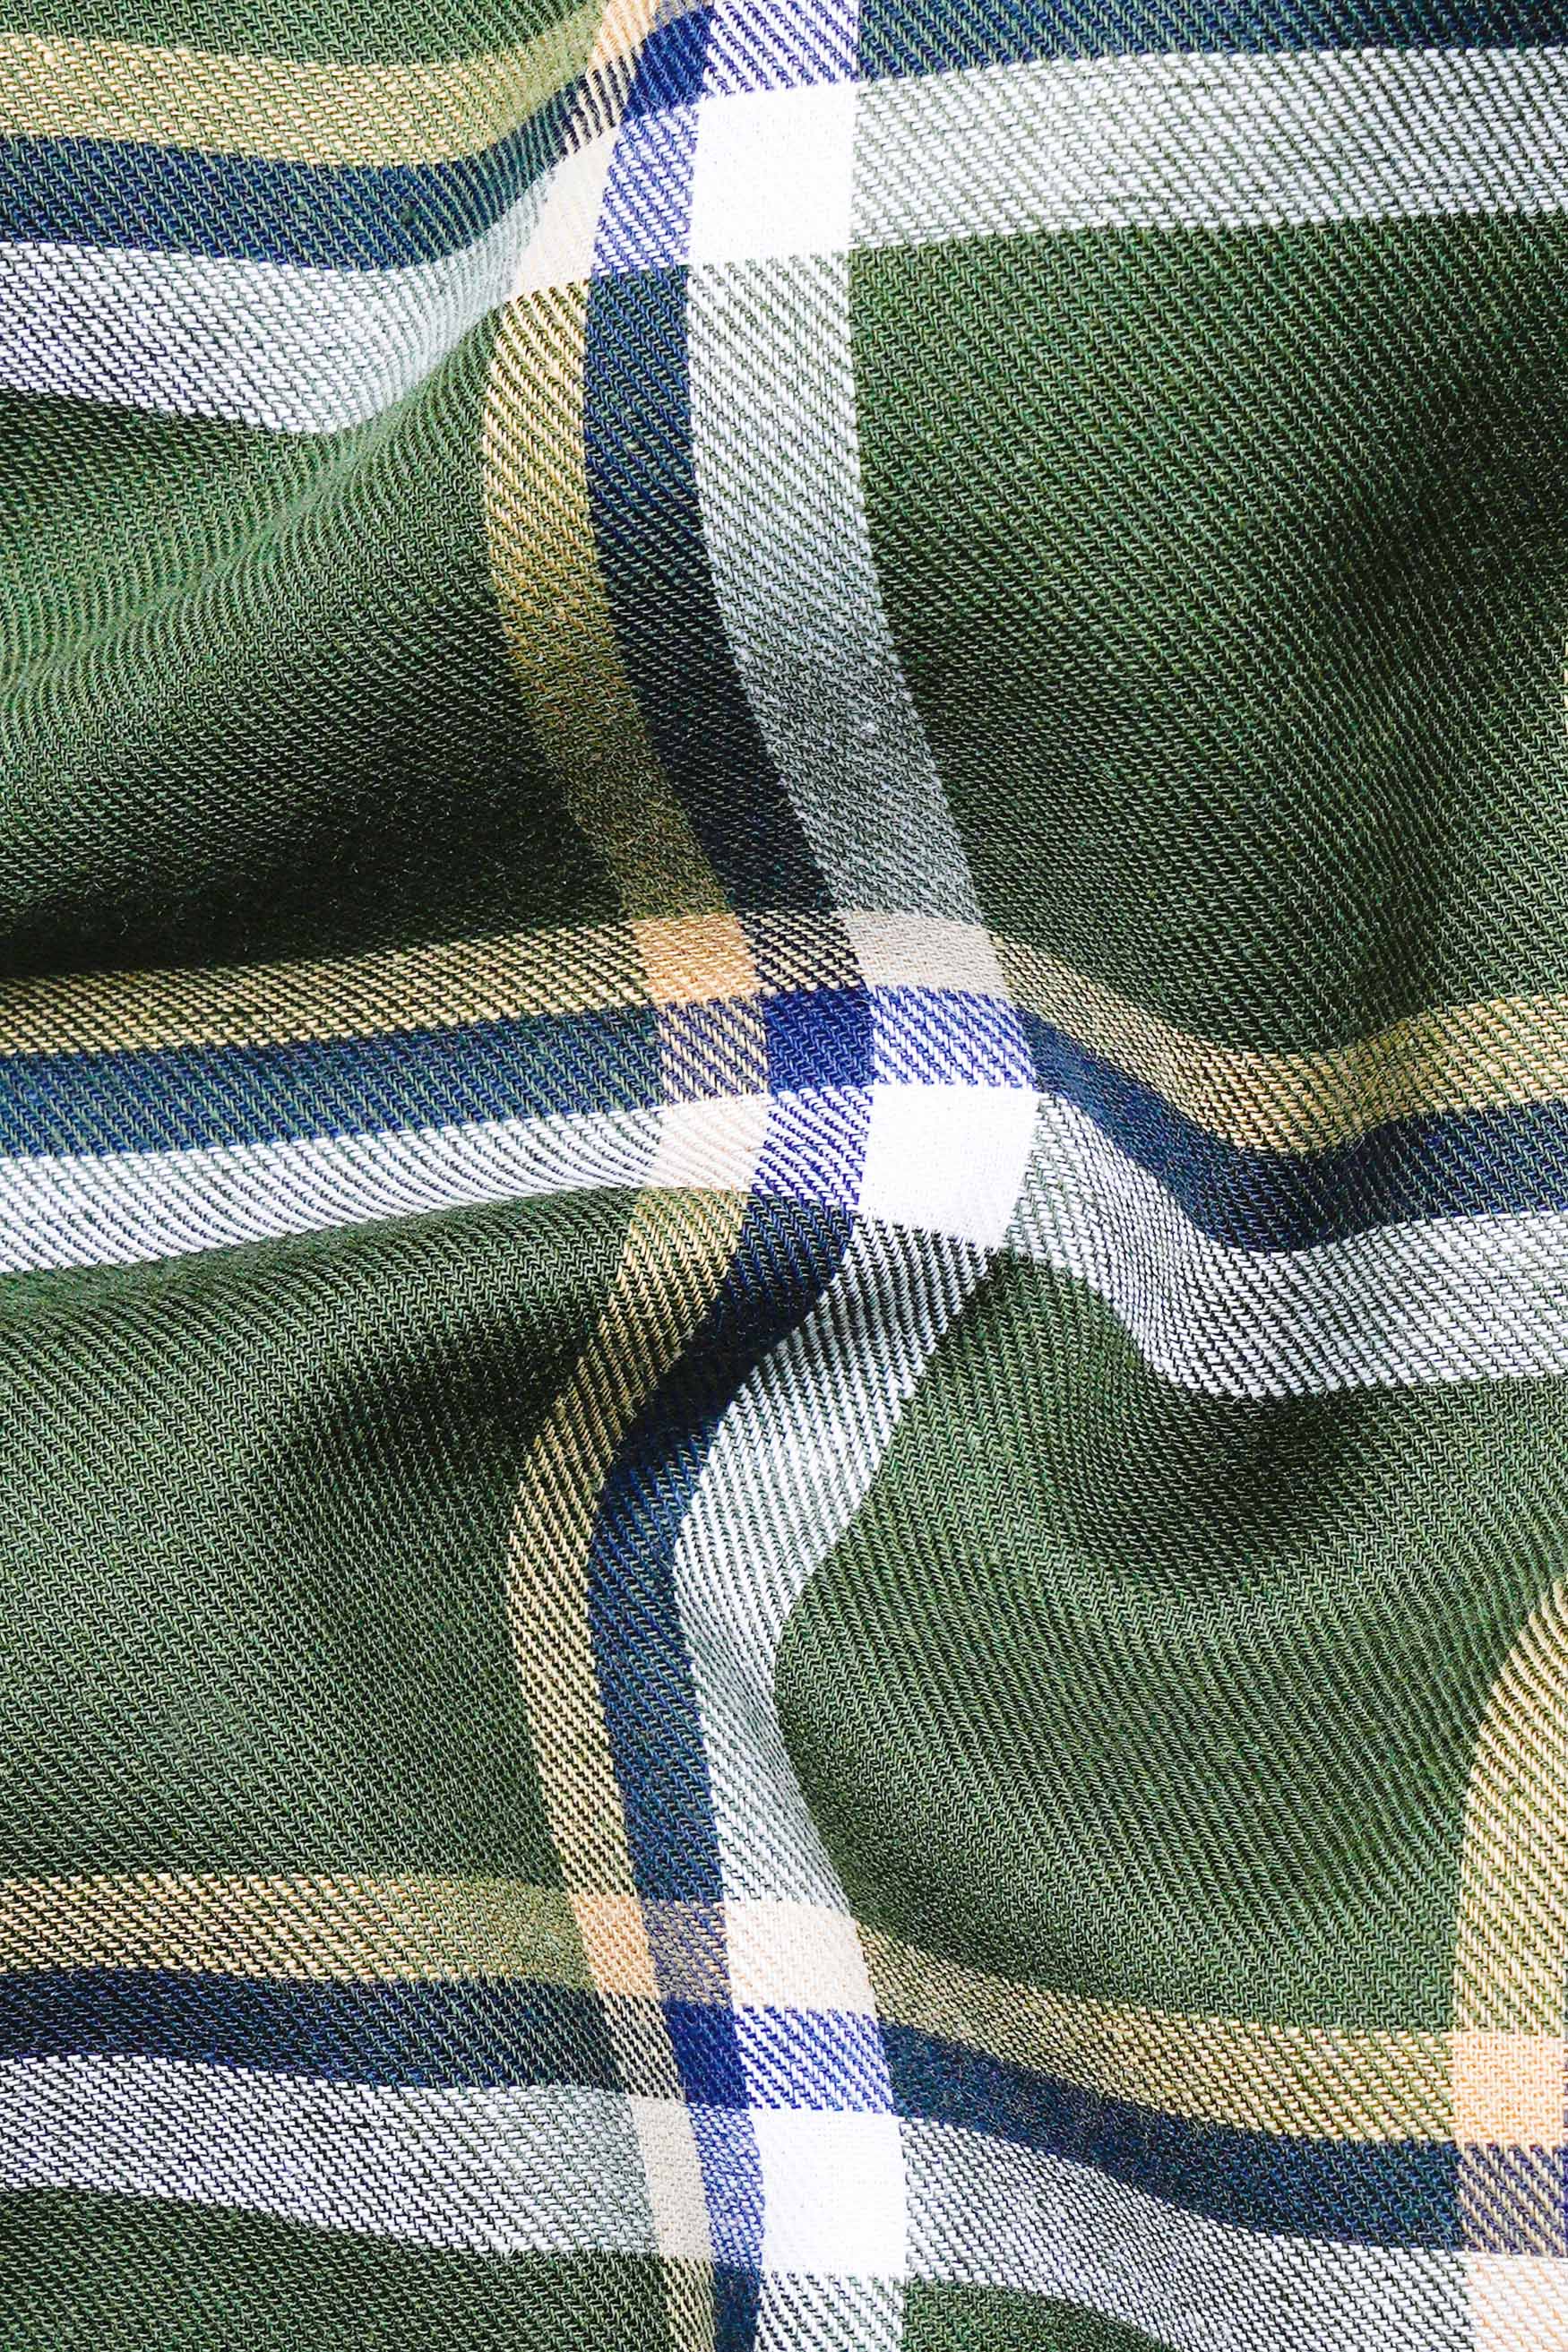 Myrtle Green and Nile Blue Plaid with Brand Name Patchwork Twill Premium Cotton Designer Shirt 5704-GR-E287-38, 5704-GR-E287-H-38, 5704-GR-E287-39, 5704-GR-E287-H-39, 5704-GR-E287-40, 5704-GR-E287-H-40, 5704-GR-E287-42, 5704-GR-E287-H-42, 5704-GR-E287-44, 5704-GR-E287-H-44, 5704-GR-E287-46, 5704-GR-E287-H-46, 5704-GR-E287-48, 5704-GR-E287-H-48, 5704-GR-E287-50, 5704-GR-E287-H-50, 5704-GR-E287-52, 5704-GR-E287-H-52